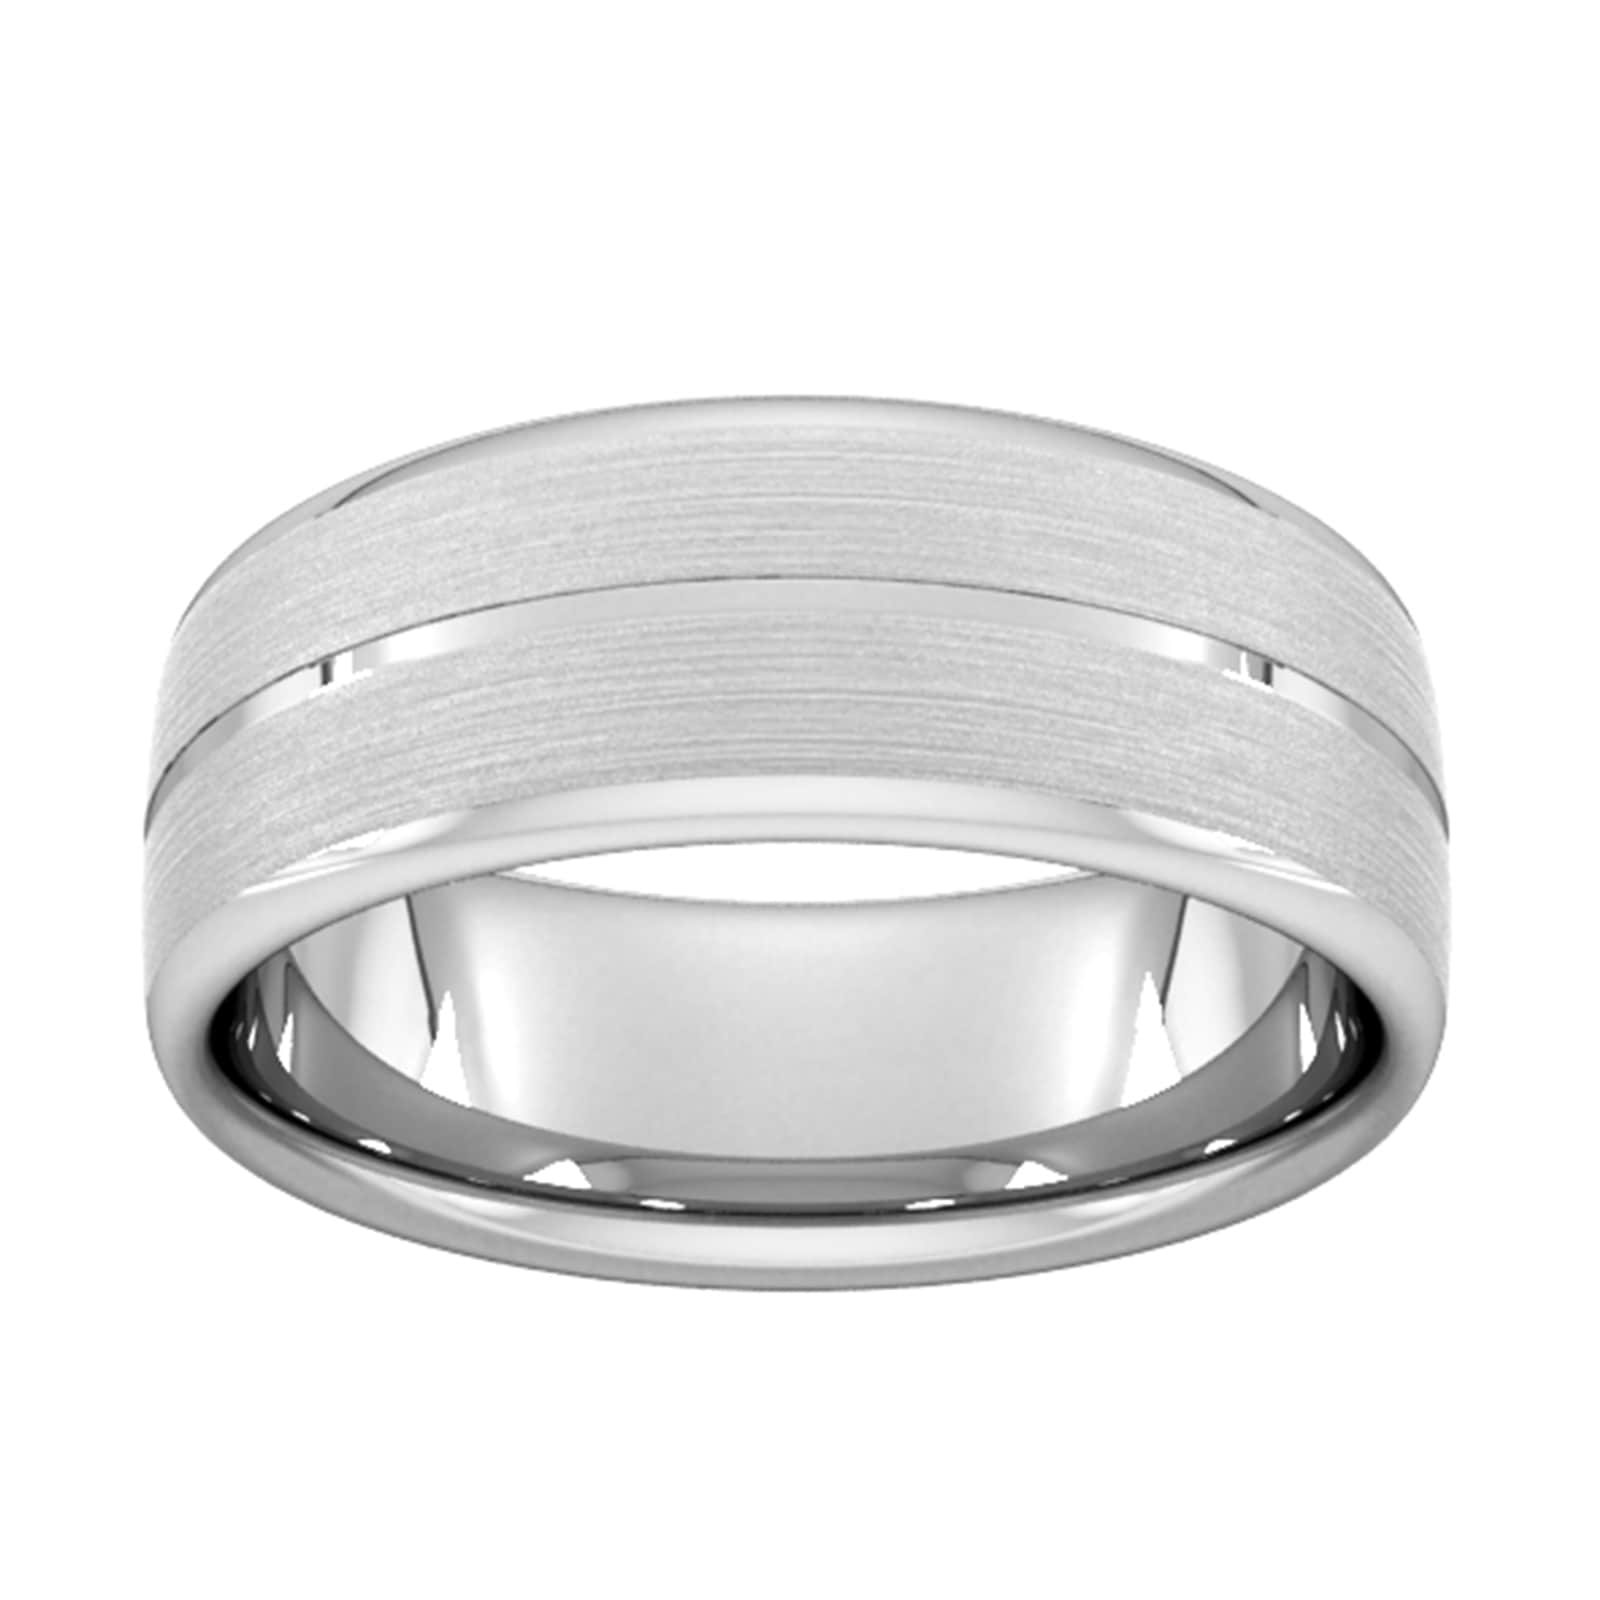 8mm Slight Court Standard Centre Groove With Chamfered Edge Wedding Ring In 9 Carat White Gold - Ring Size P